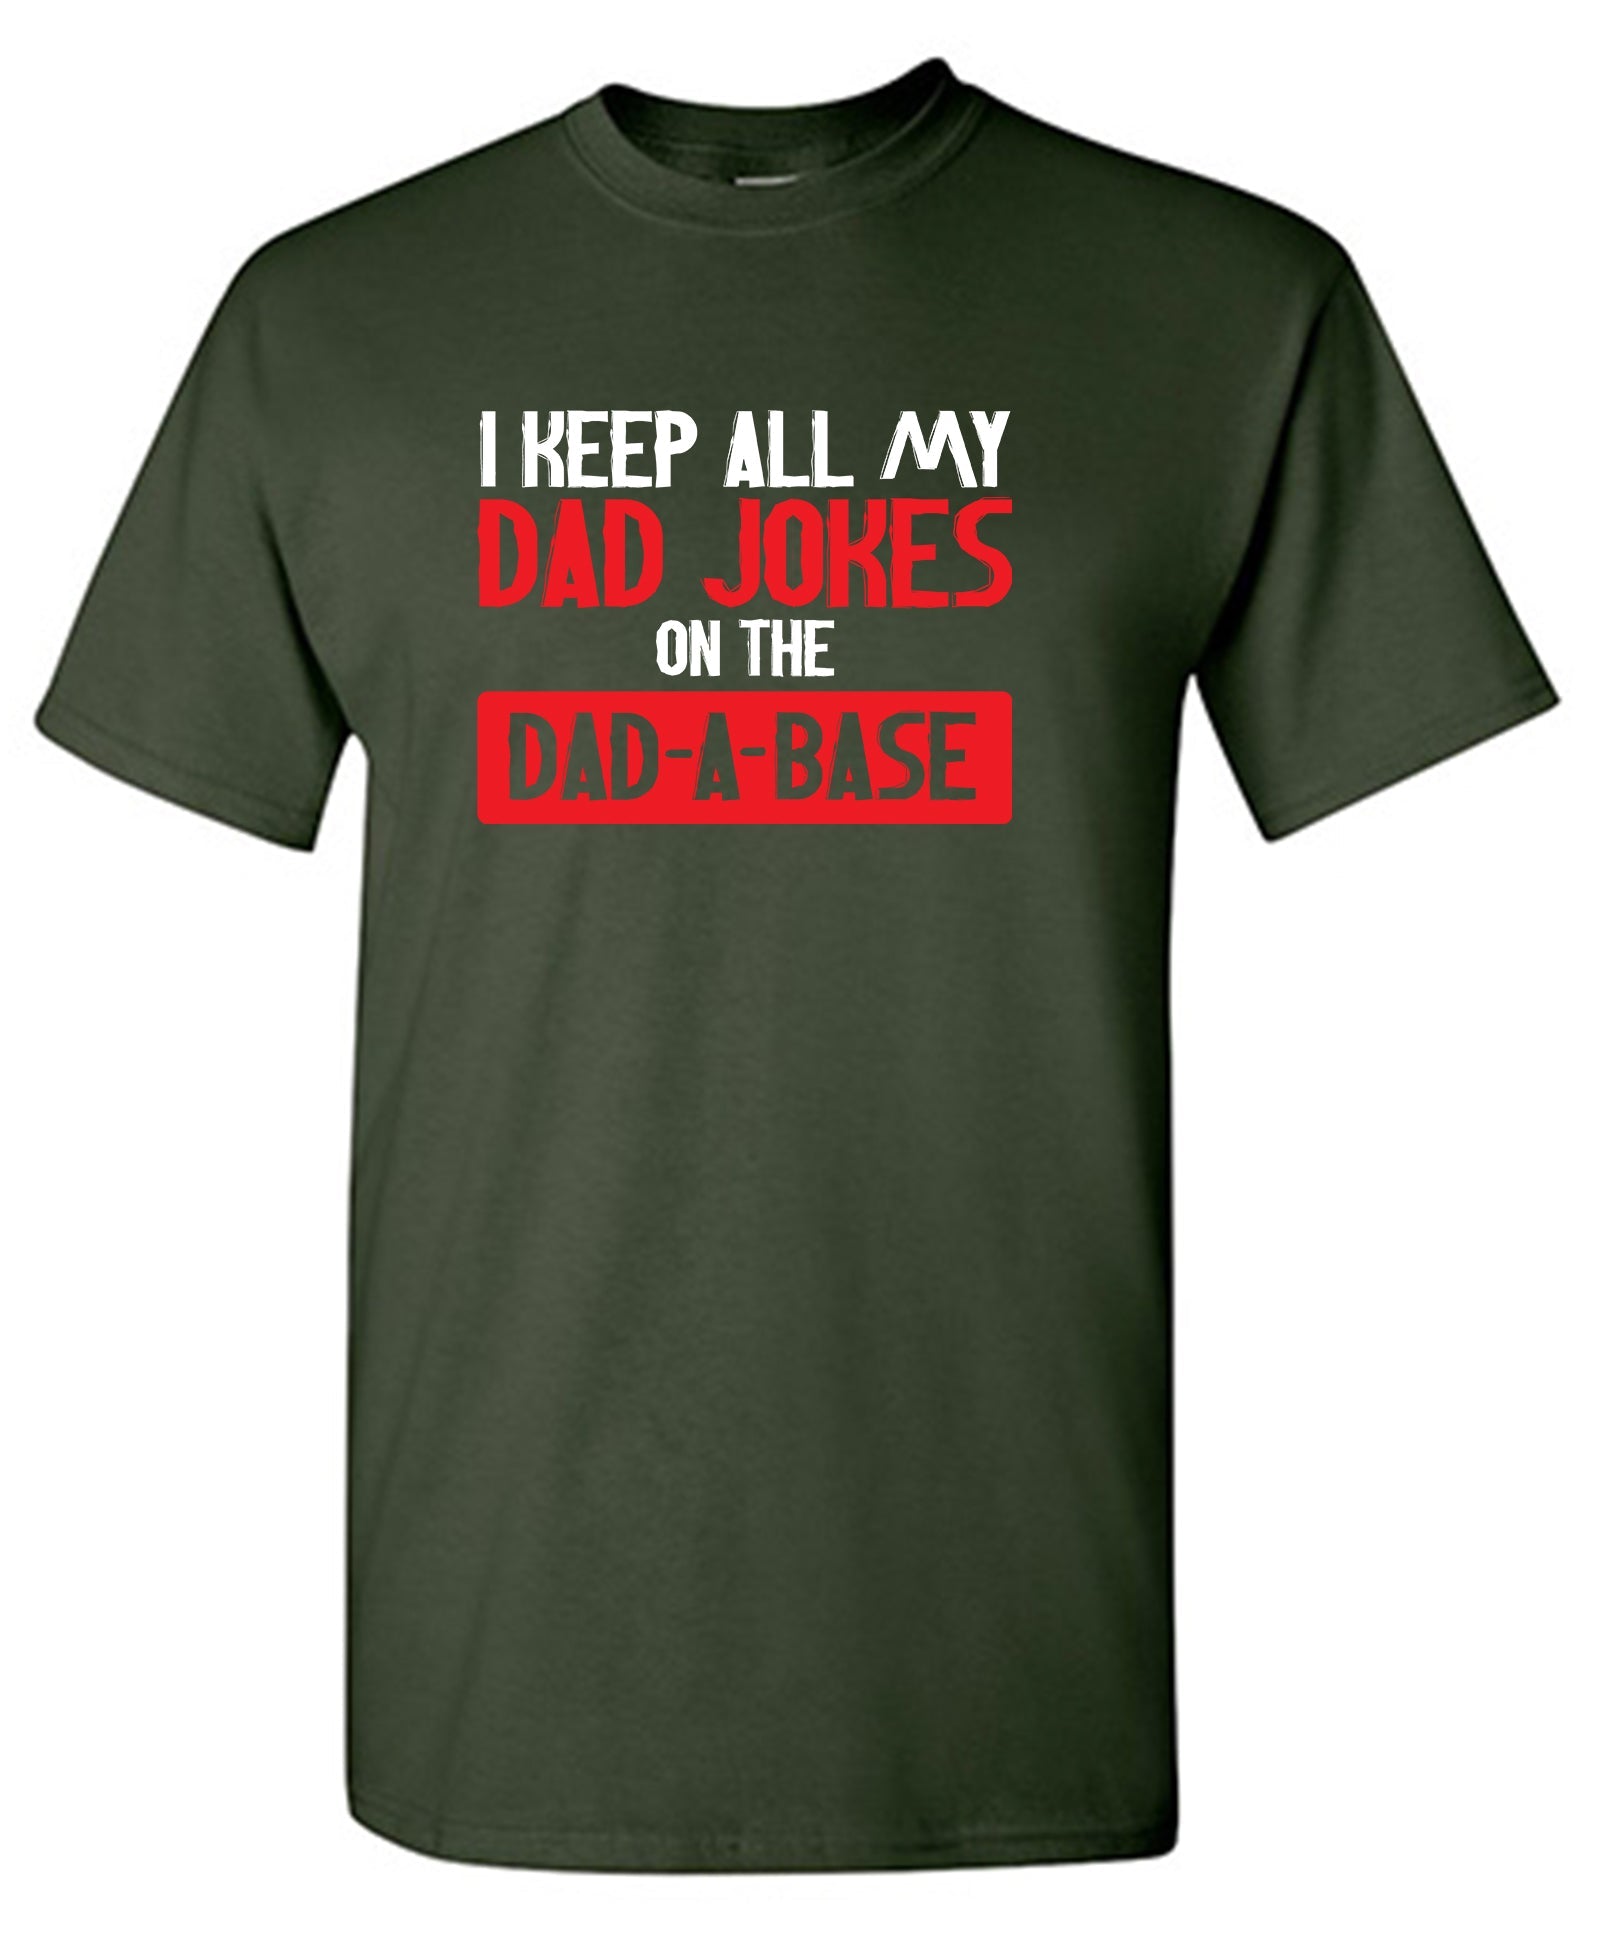 I Keep All My Dad Jokes in a Dad-a-Base - Funny T Shirts & Graphic Tees